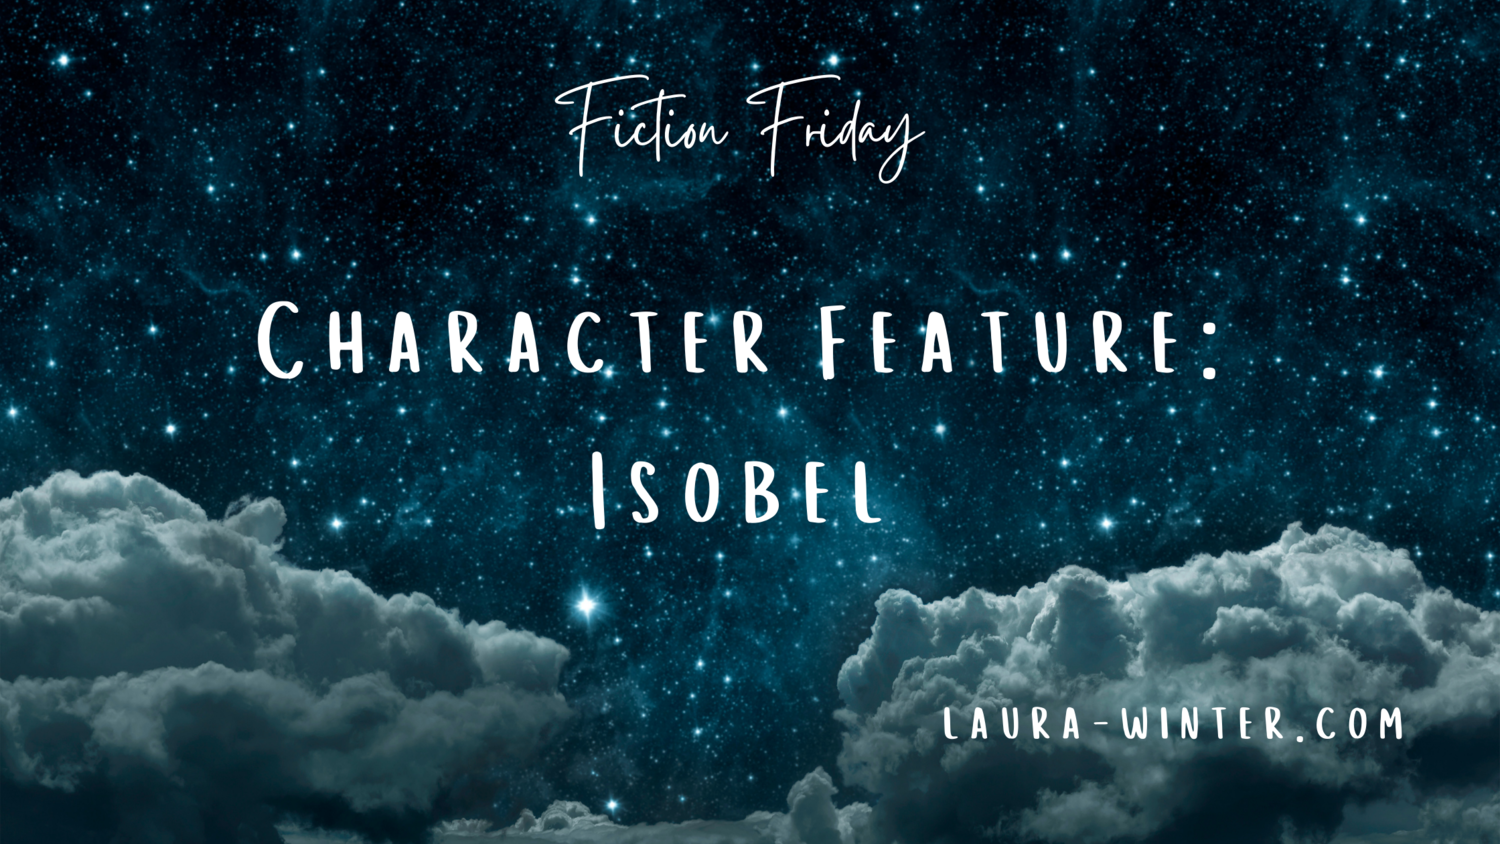 Character Feature: Isobel